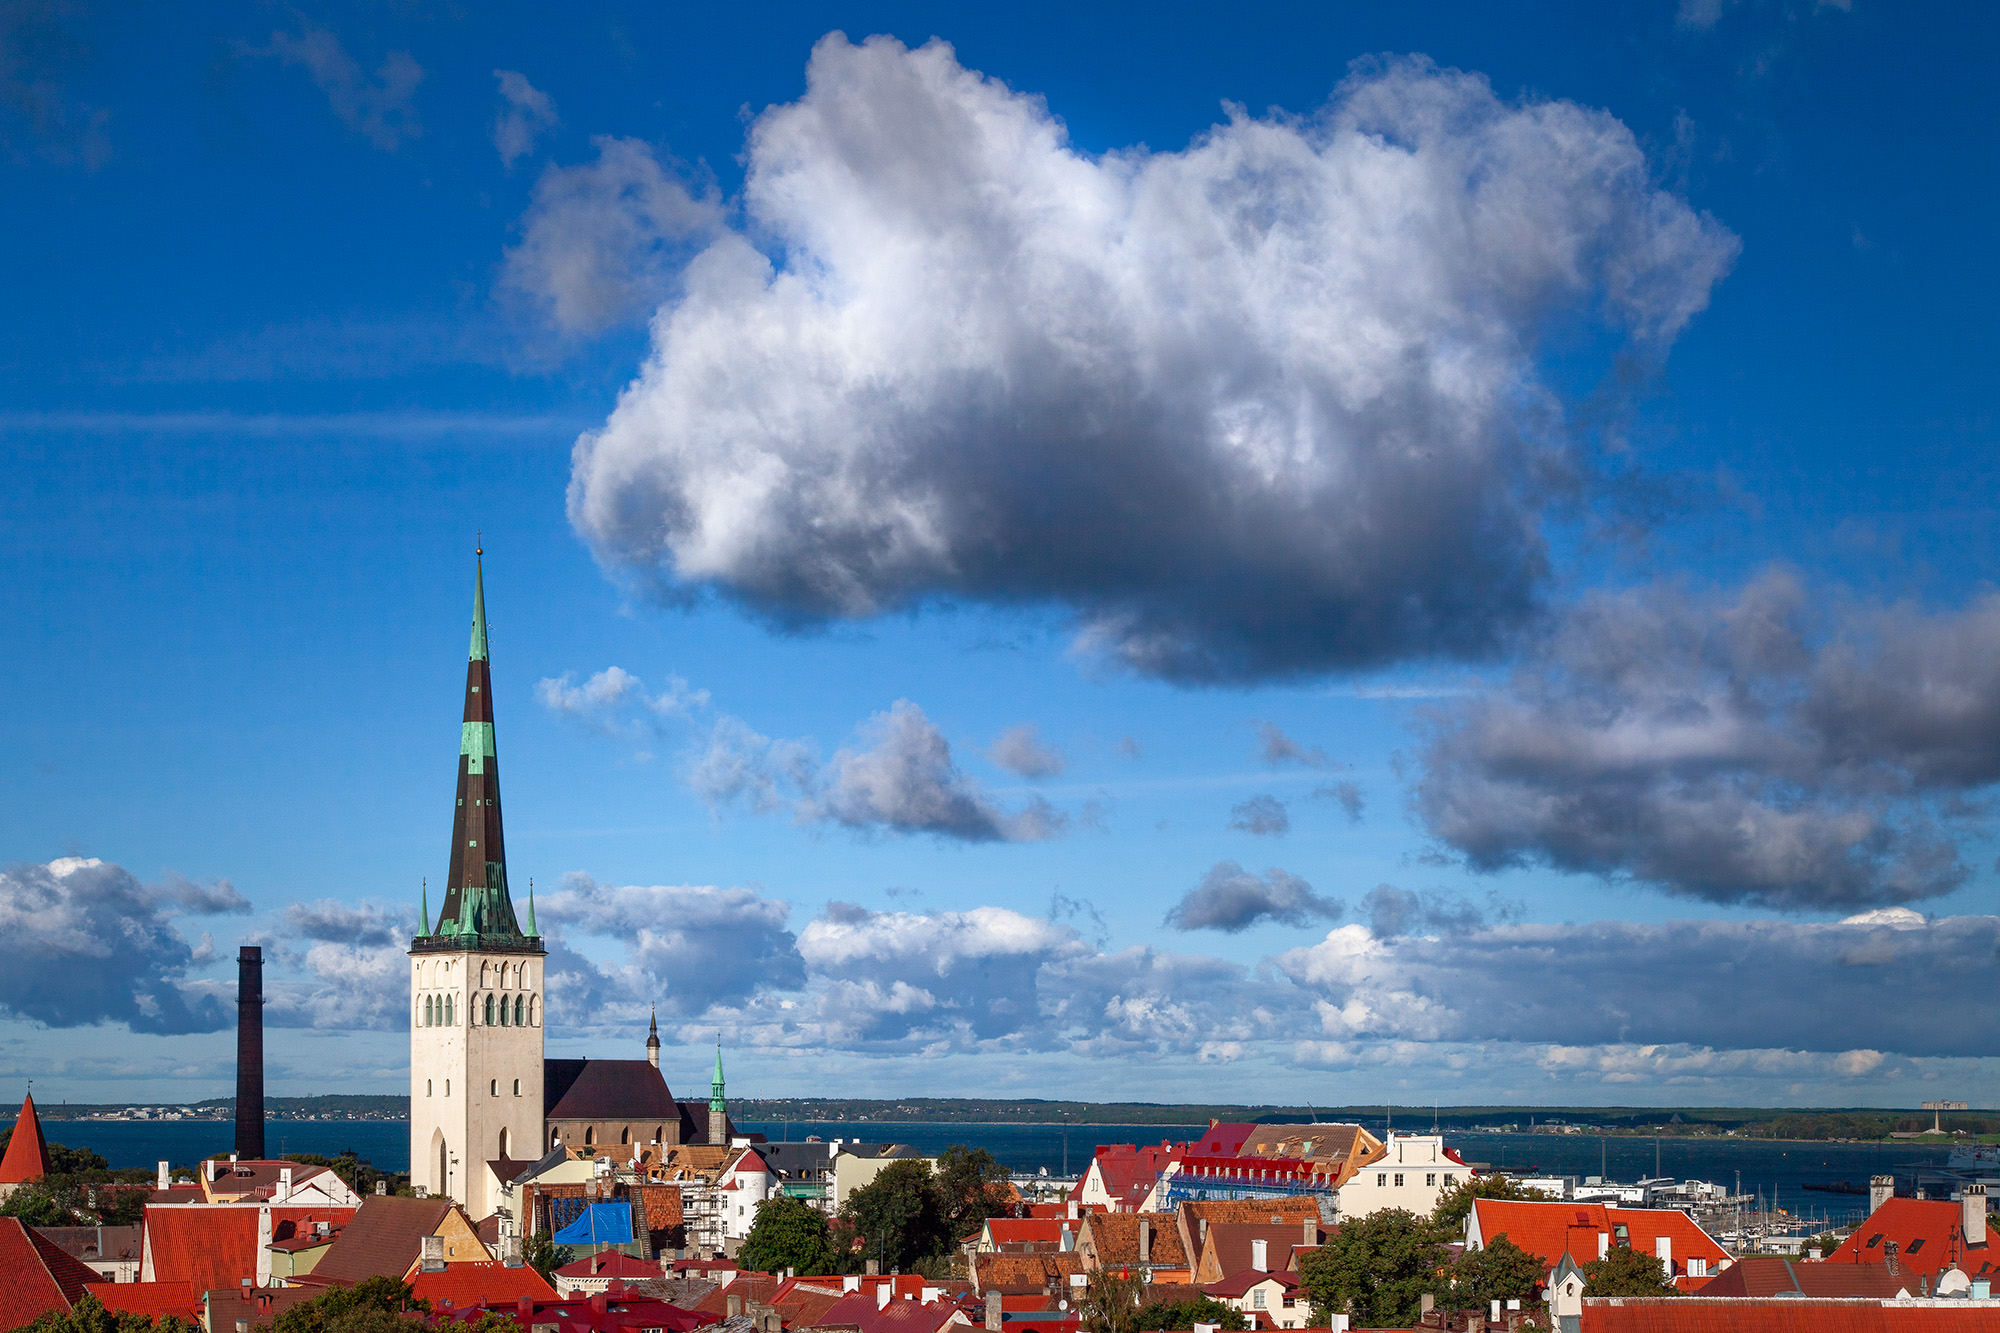 In this striking image captured in Tallinn, Estonia, the iconic St. Olaf's Church steeple rises proudly above a sea of rooftops...